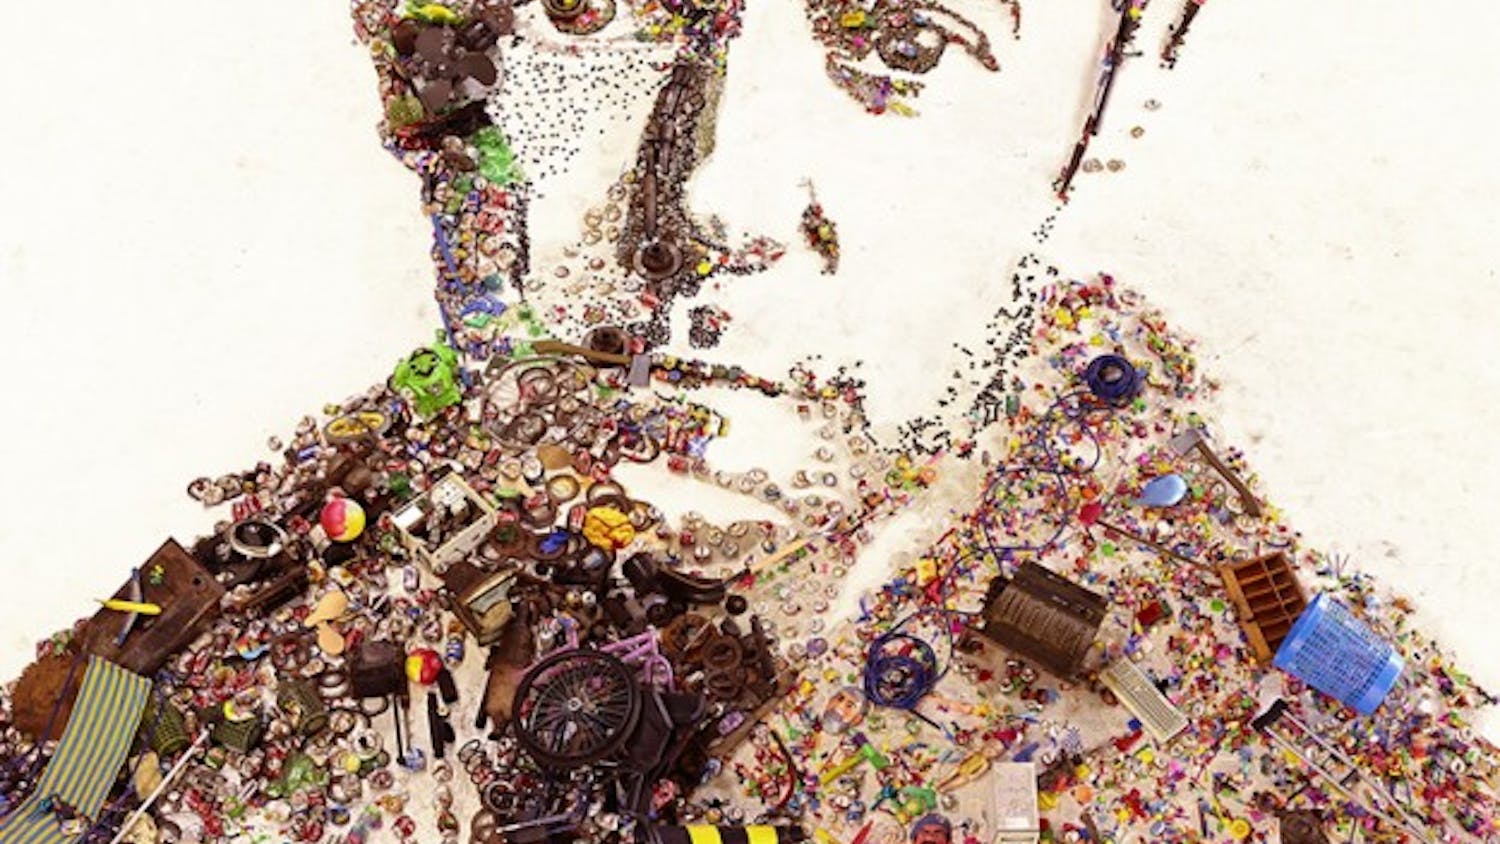 Khyber Pass, Self-Portrait as an Oriental, after Rembrandt from the Pictures of Junk series, 2005. Chromogenic print. HIgh Musuem of Art, Atlanta, with funds from the H.B. and Doris Massey Charitable Trust, 2005.288. Art © Vik Muniz/Licensed by VAGA, New York, NY 